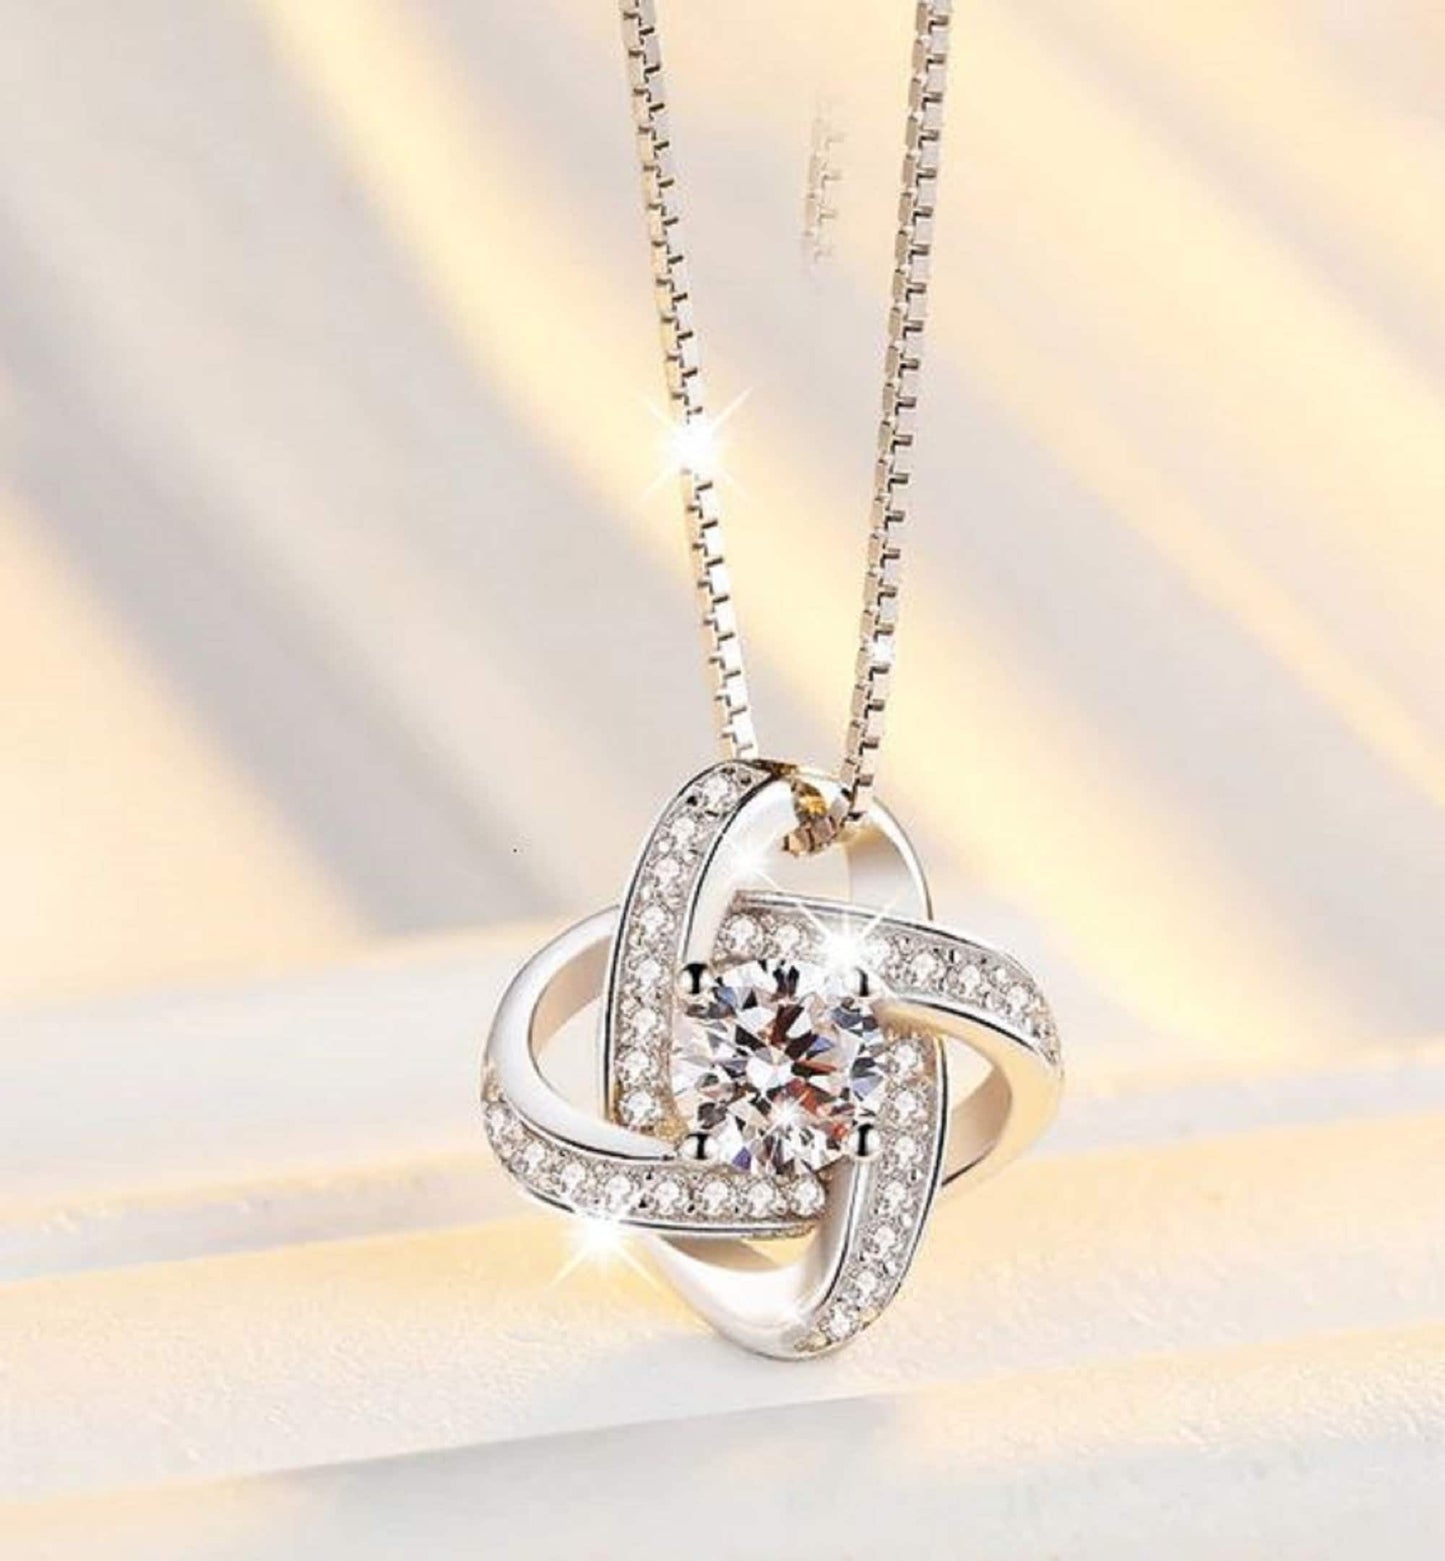 Sterling Silver Four Leaf Clover Neckline Necklace with Cubic Zirconia - Friendship, Promise, Mother's Day, Birthday, Just Because